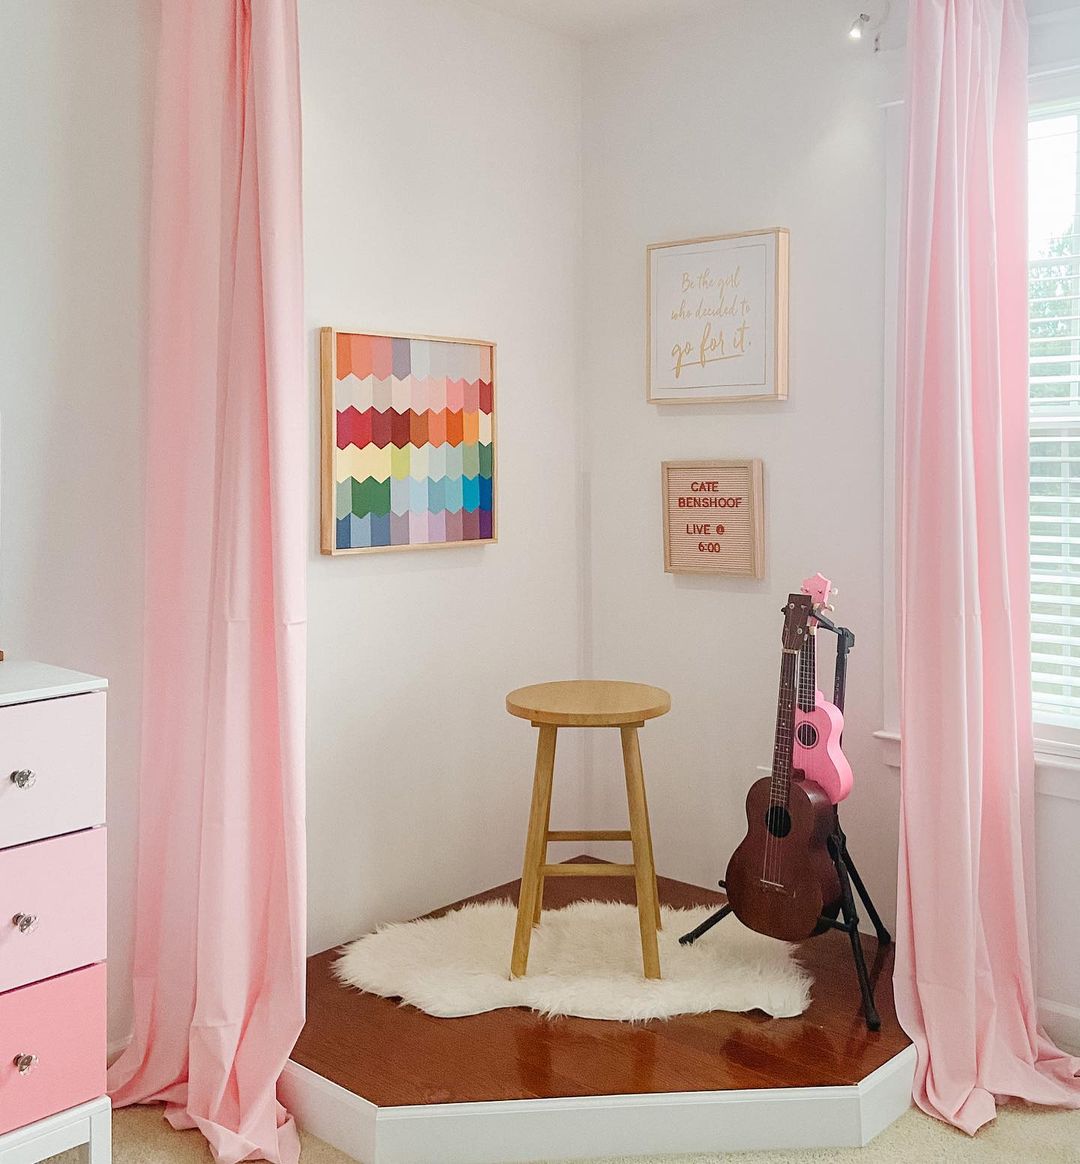 Stool and Guitar Area in a Small Stage Space of a Playroom. Photo by Instagram user @jenbenshoof